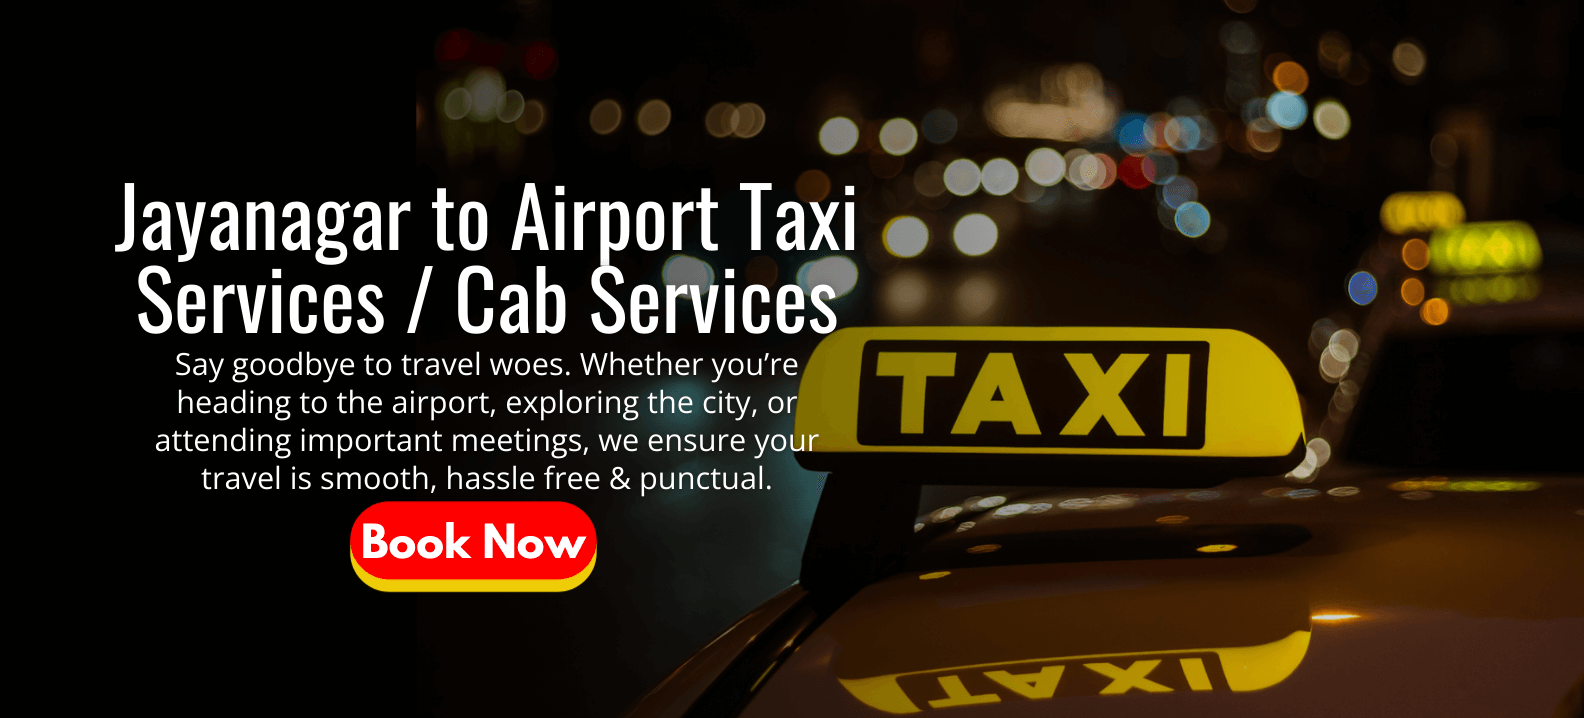 Jayanagar to Airport Taxi Services _ Cab Services